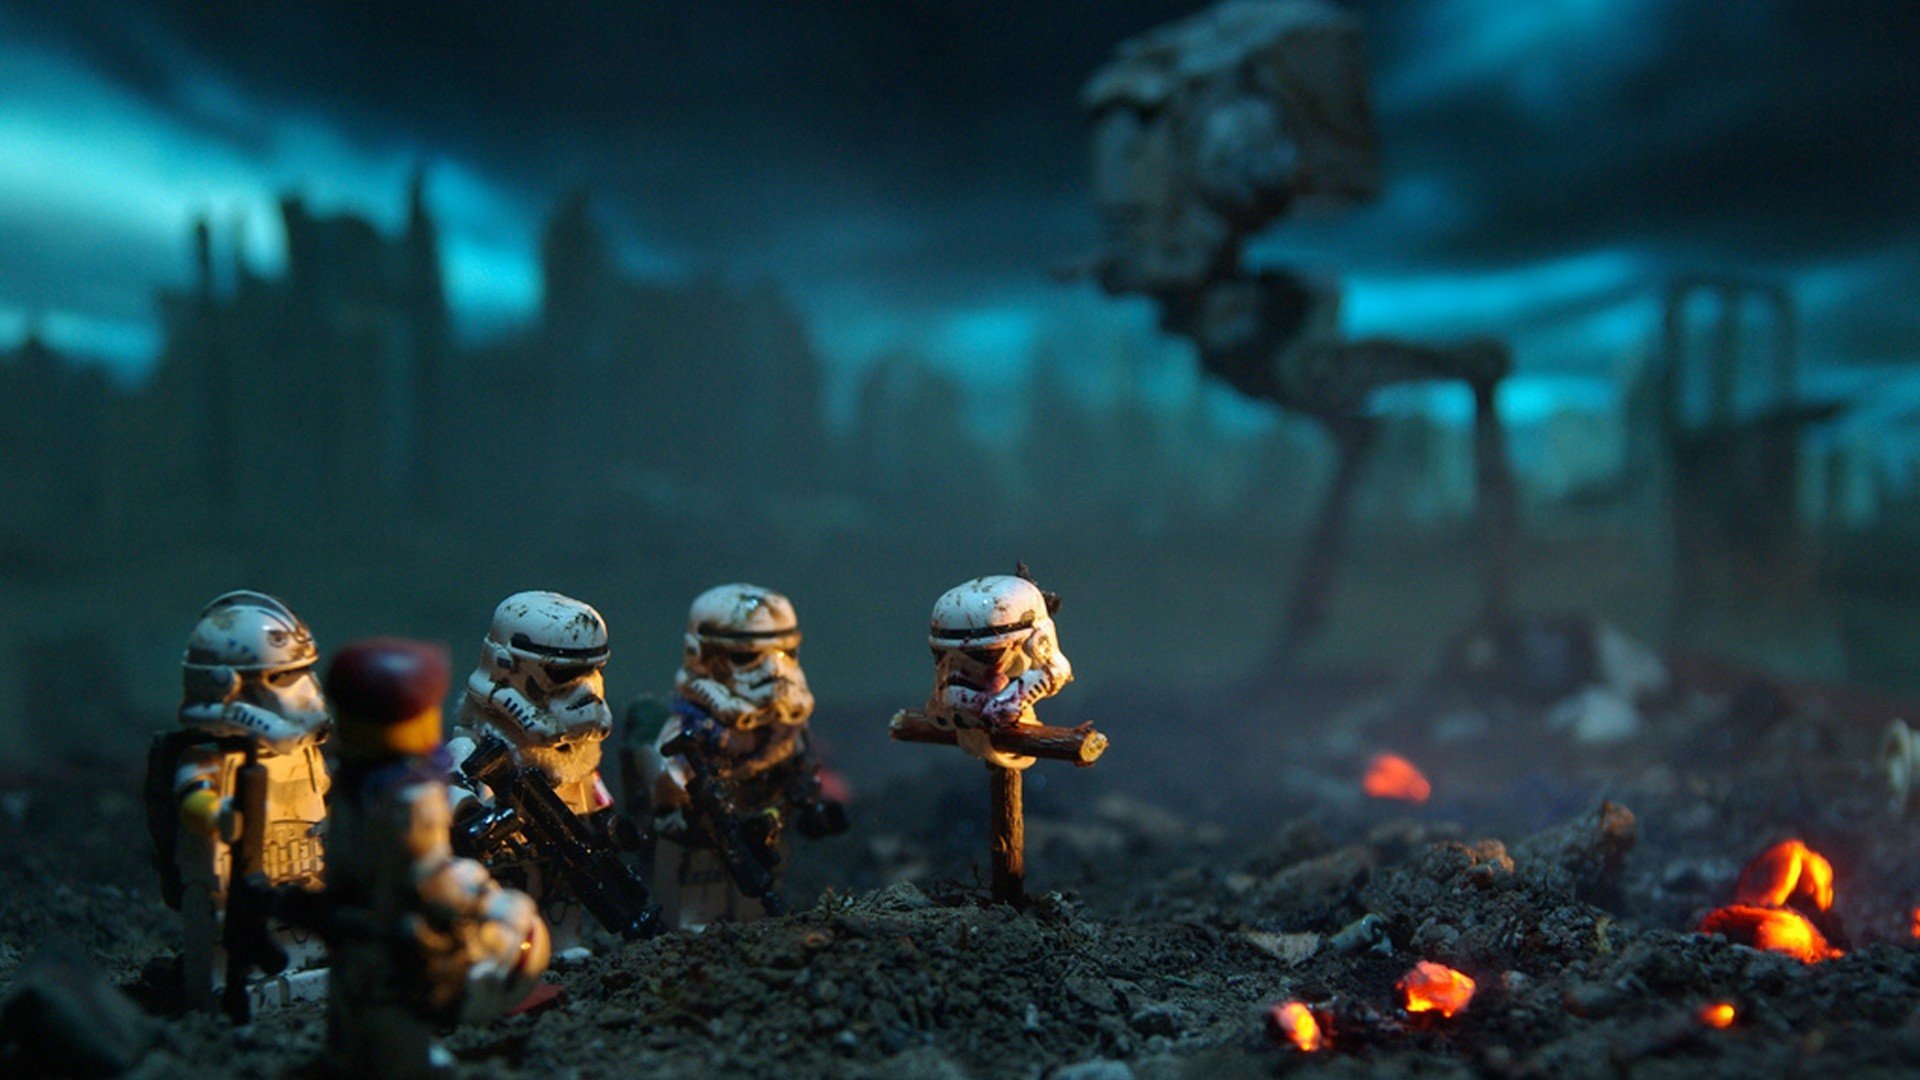 Star Wars Lego Cool Pictures HD Wallpaper of Lego   hdwallpaper2013